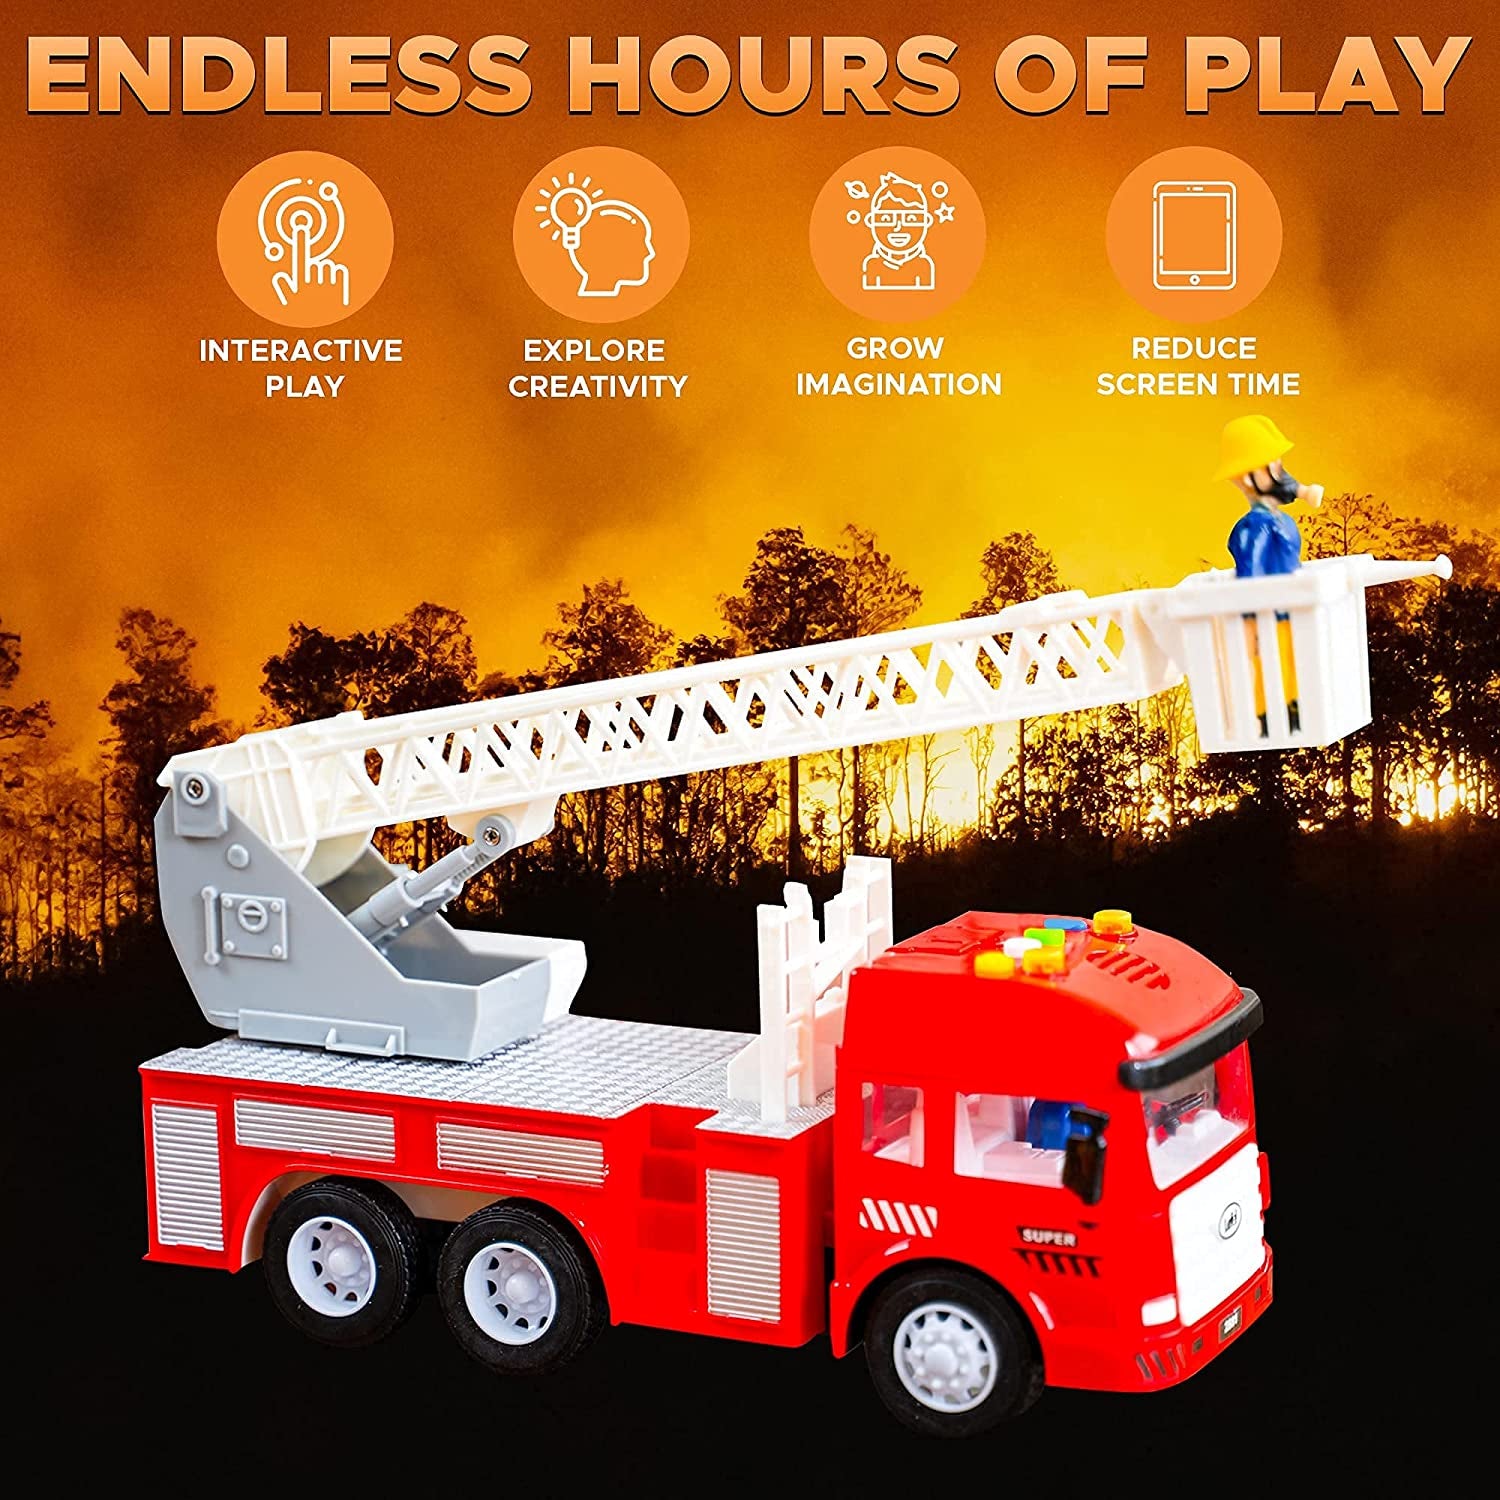 Fire Truck Toy with Flashing Lights, 4 Siren Sounds, Extending Rescue Ladder, Friction Strong Powered Firetruck Engine, Best Firefighter Playset Birthday Gift for Toddlers, Kids, Boys, Girls